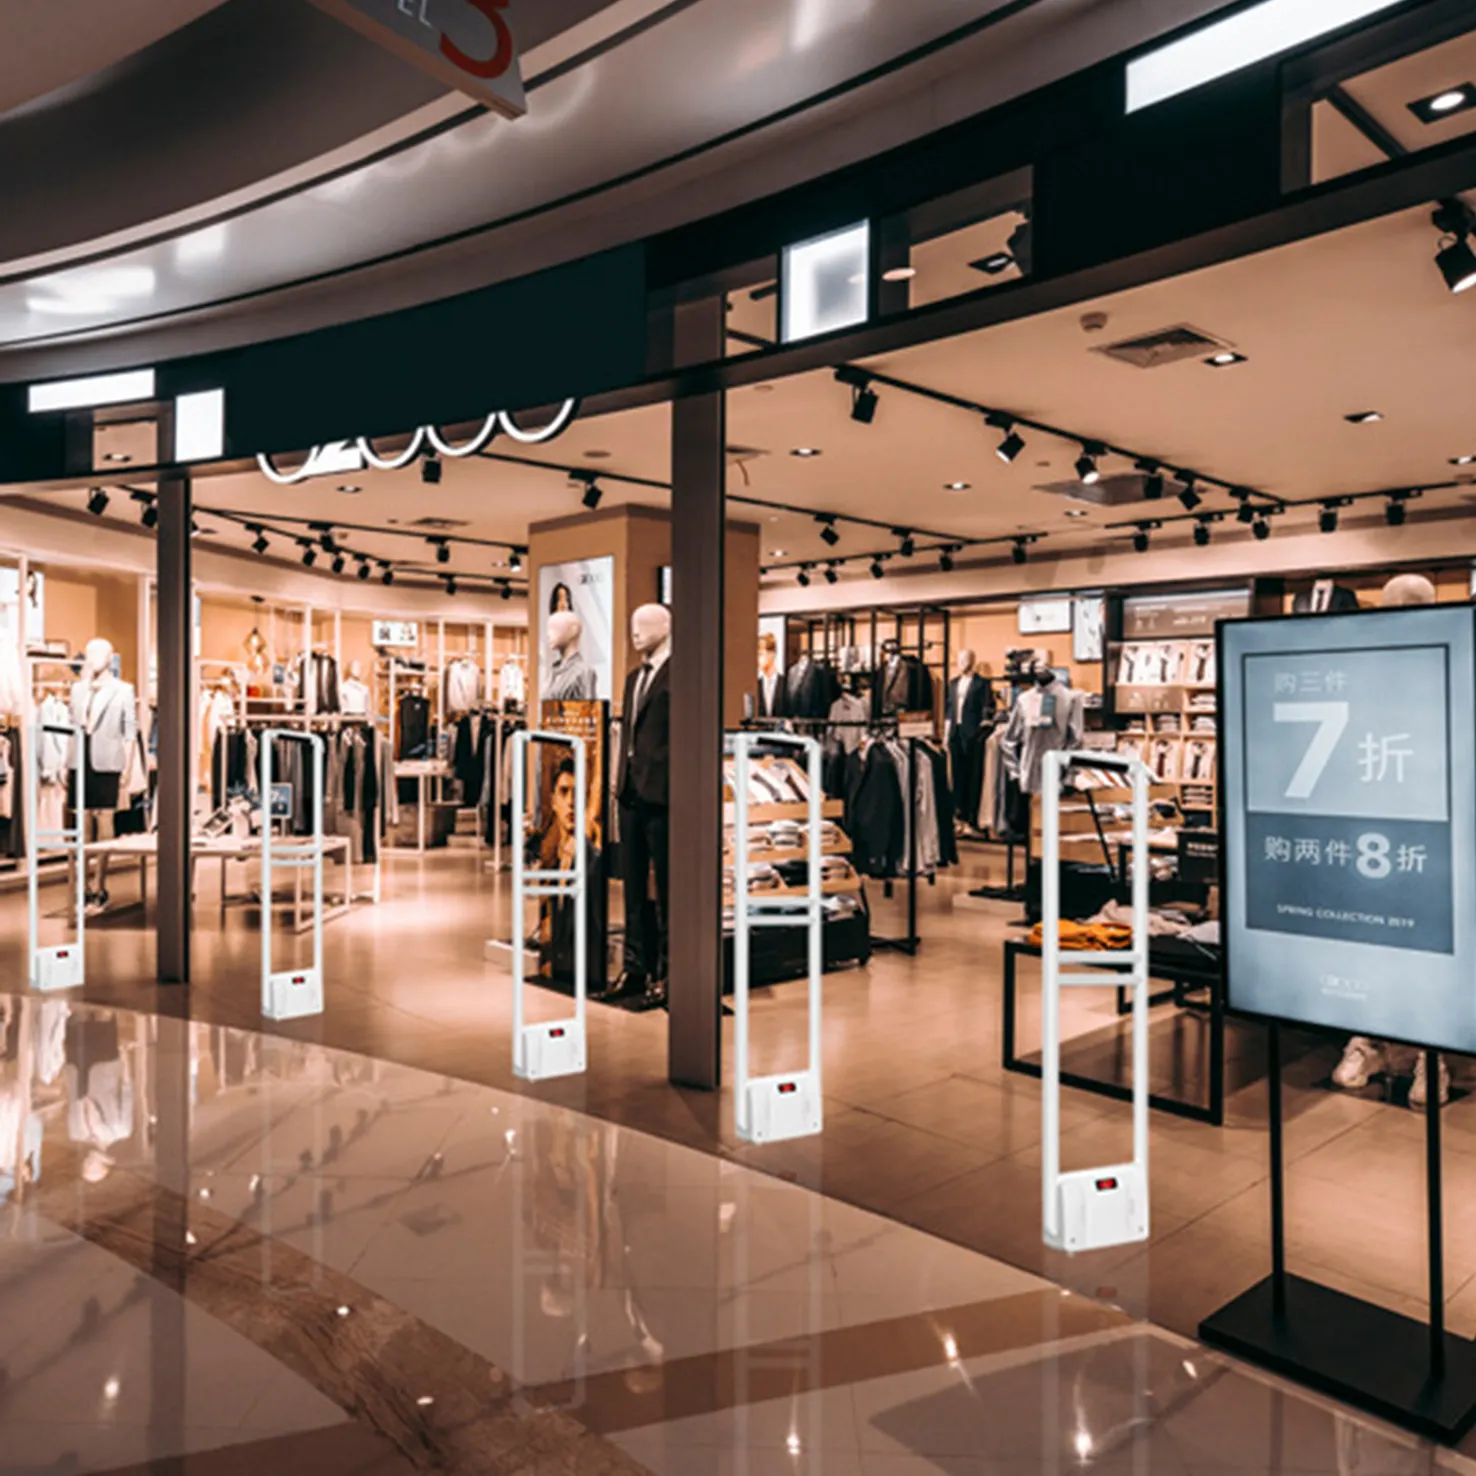 Artworld Displays Detection Systems EAS System For High Fashion Stores And Shopping Malls